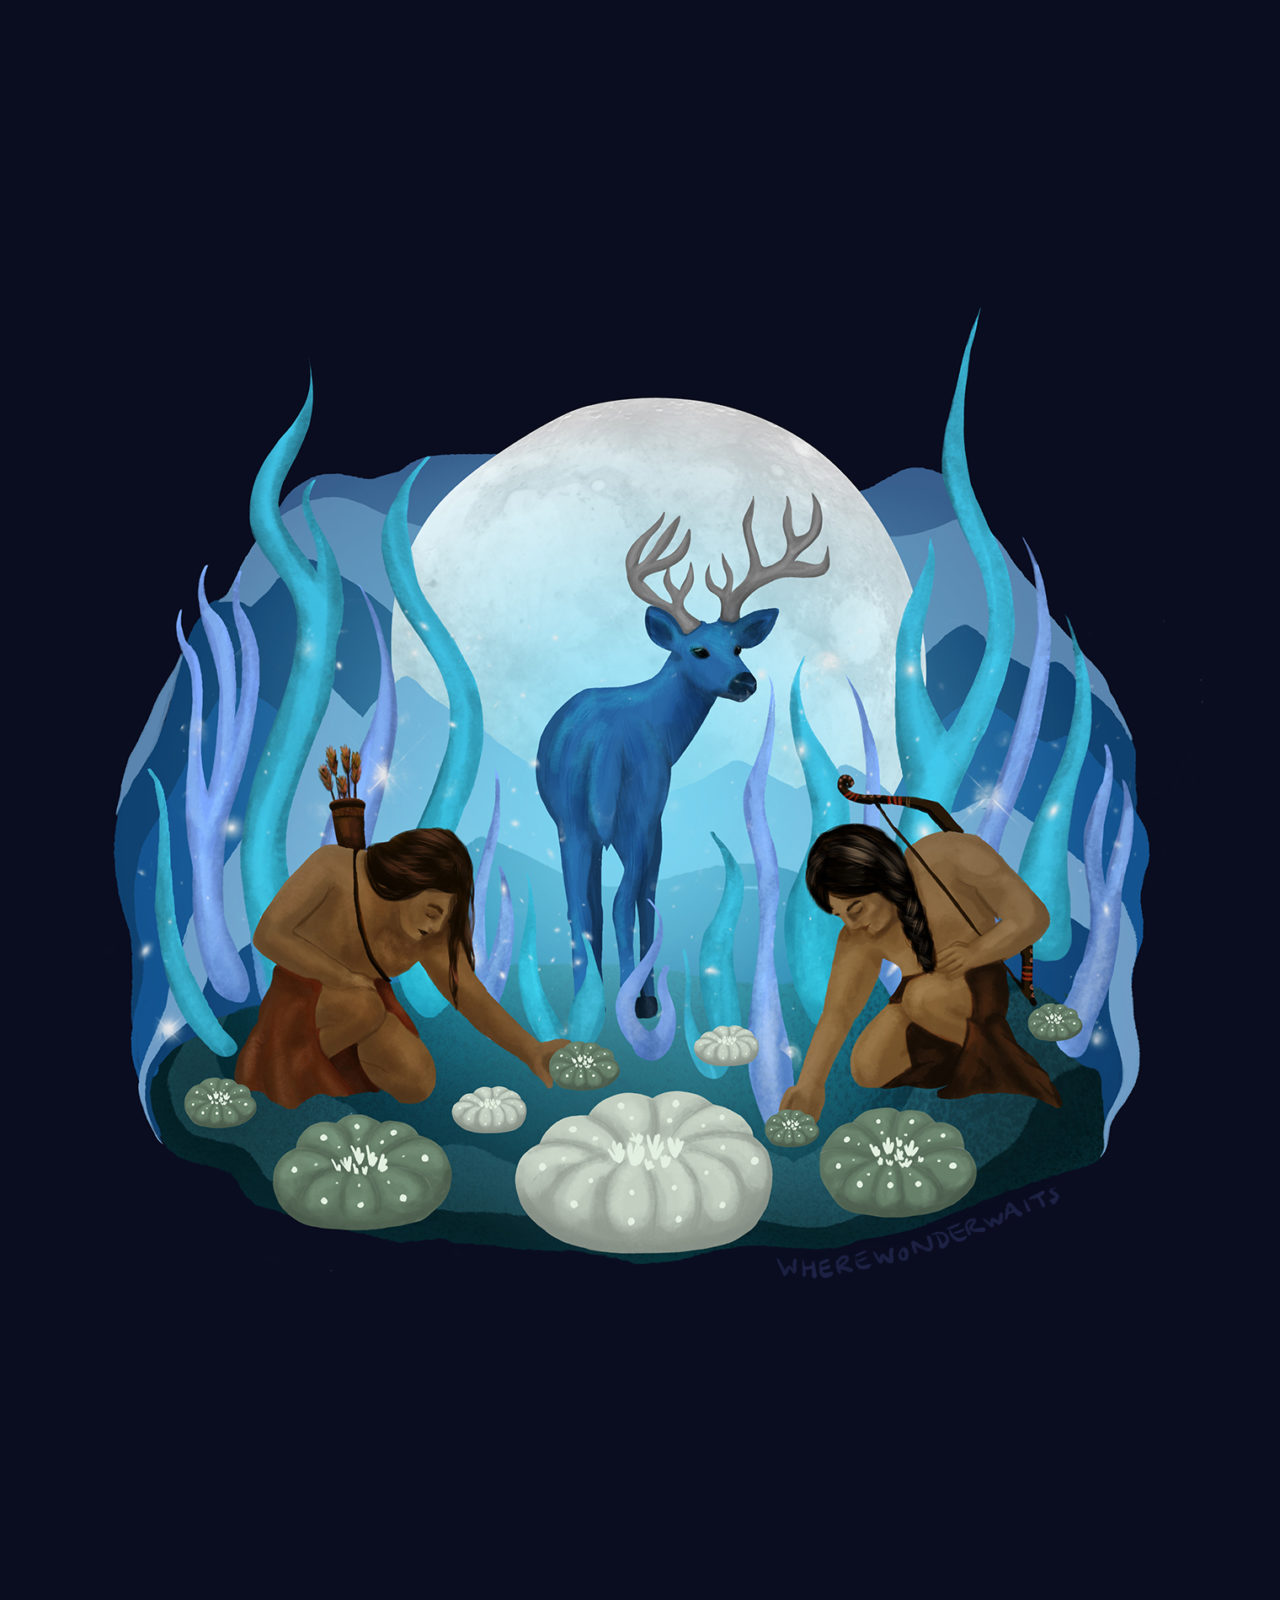 This artwork represents hunters collecting Peyote after being led there by the blue deer (venado azul).